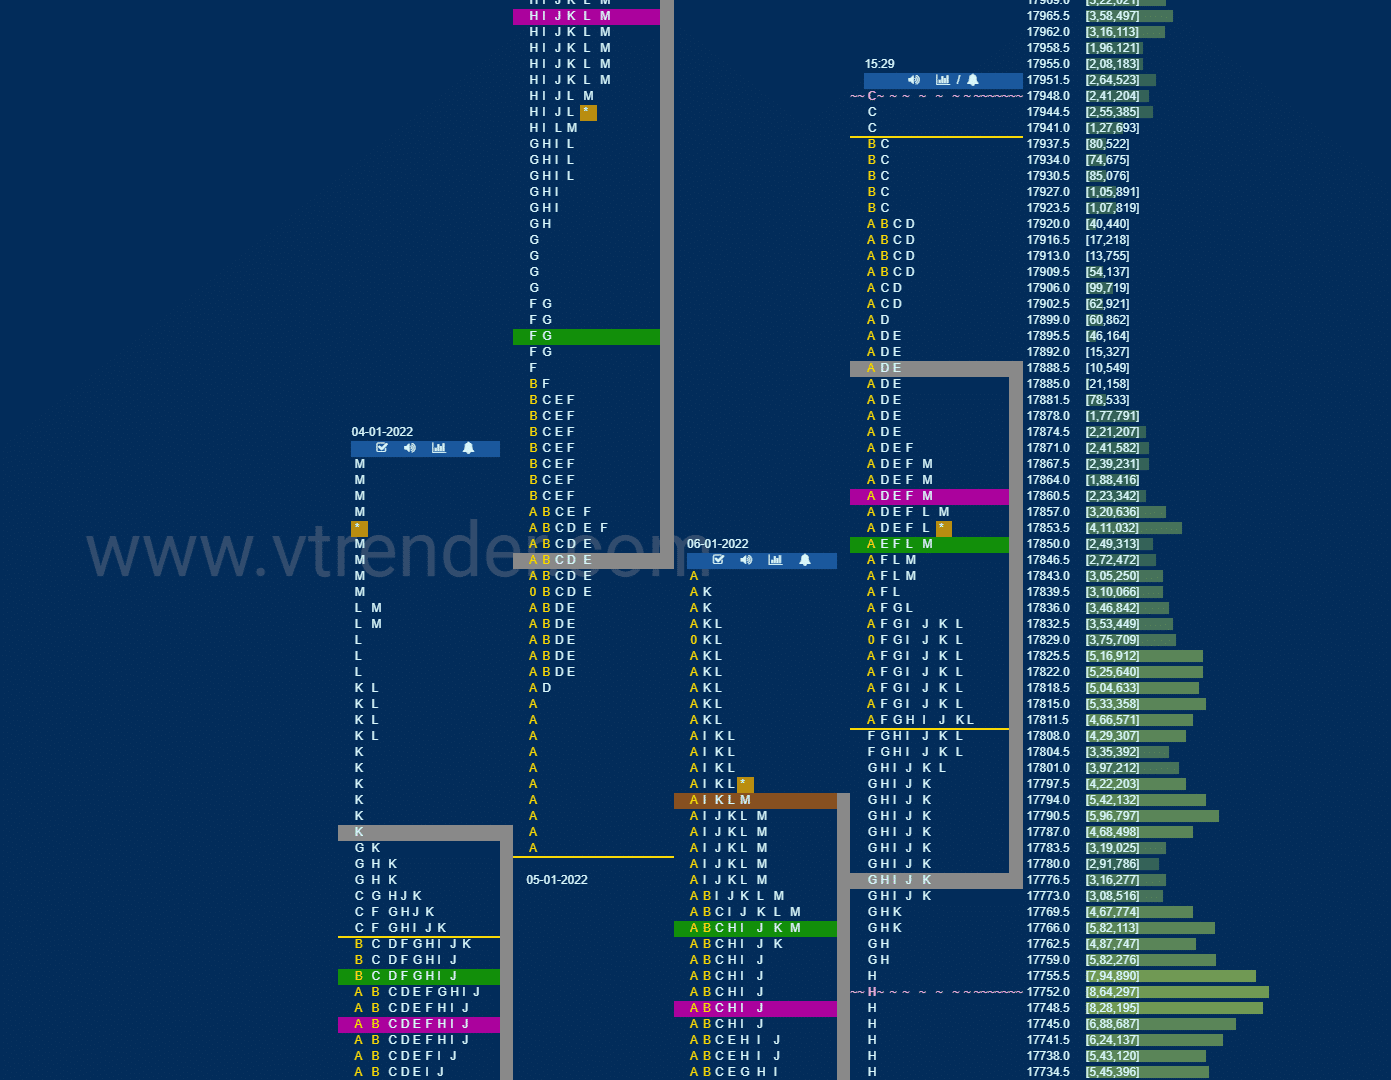 Nf 5 Market Profile Analysis Dated 07Th January 2022 Banknifty Futures, Charts, Day Trading, Intraday Trading, Intraday Trading Strategies, Market Profile, Market Profile Trading Strategies, Nifty Futures, Order Flow Analysis, Support And Resistance, Technical Analysis, Trading Strategies, Volume Profile Trading